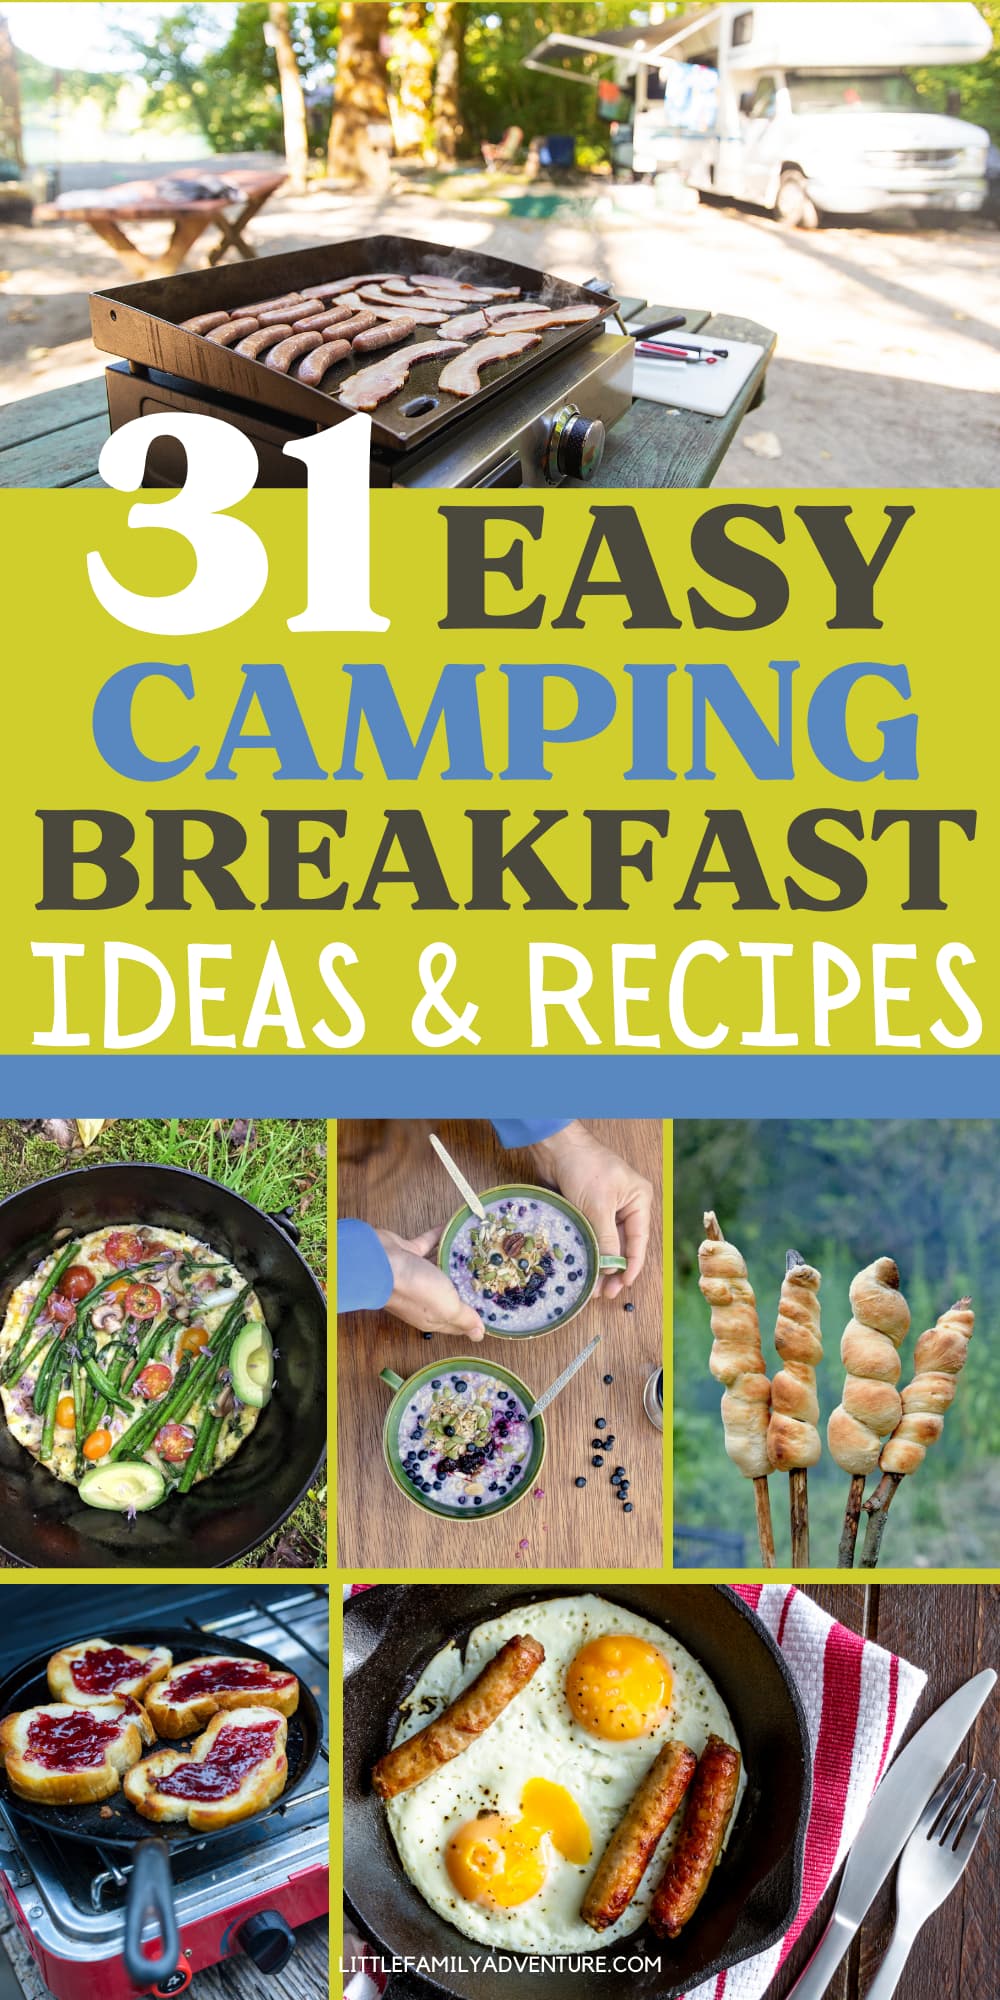 31 Easy Camping Breakfast Ideas Your Family Will Love